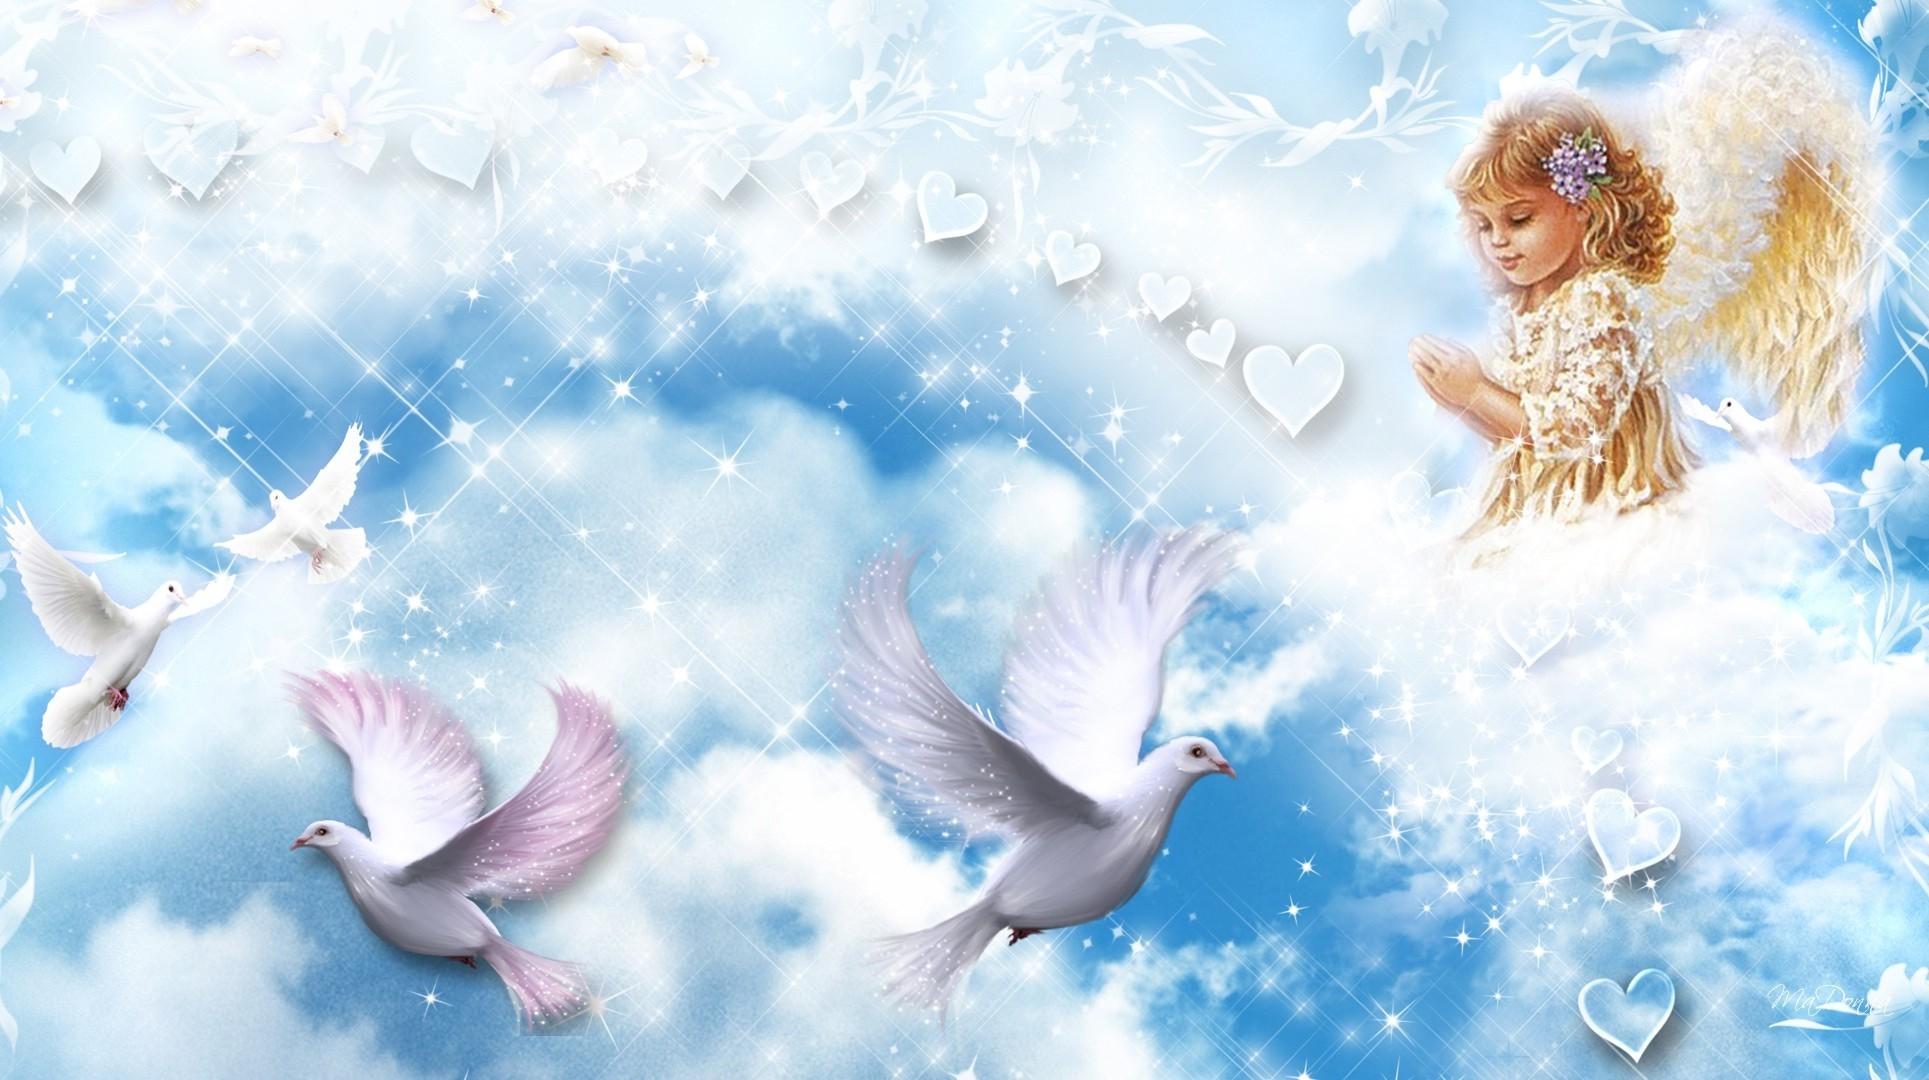 Cute Baby Angel Wallpaper.GiftWatches.CO